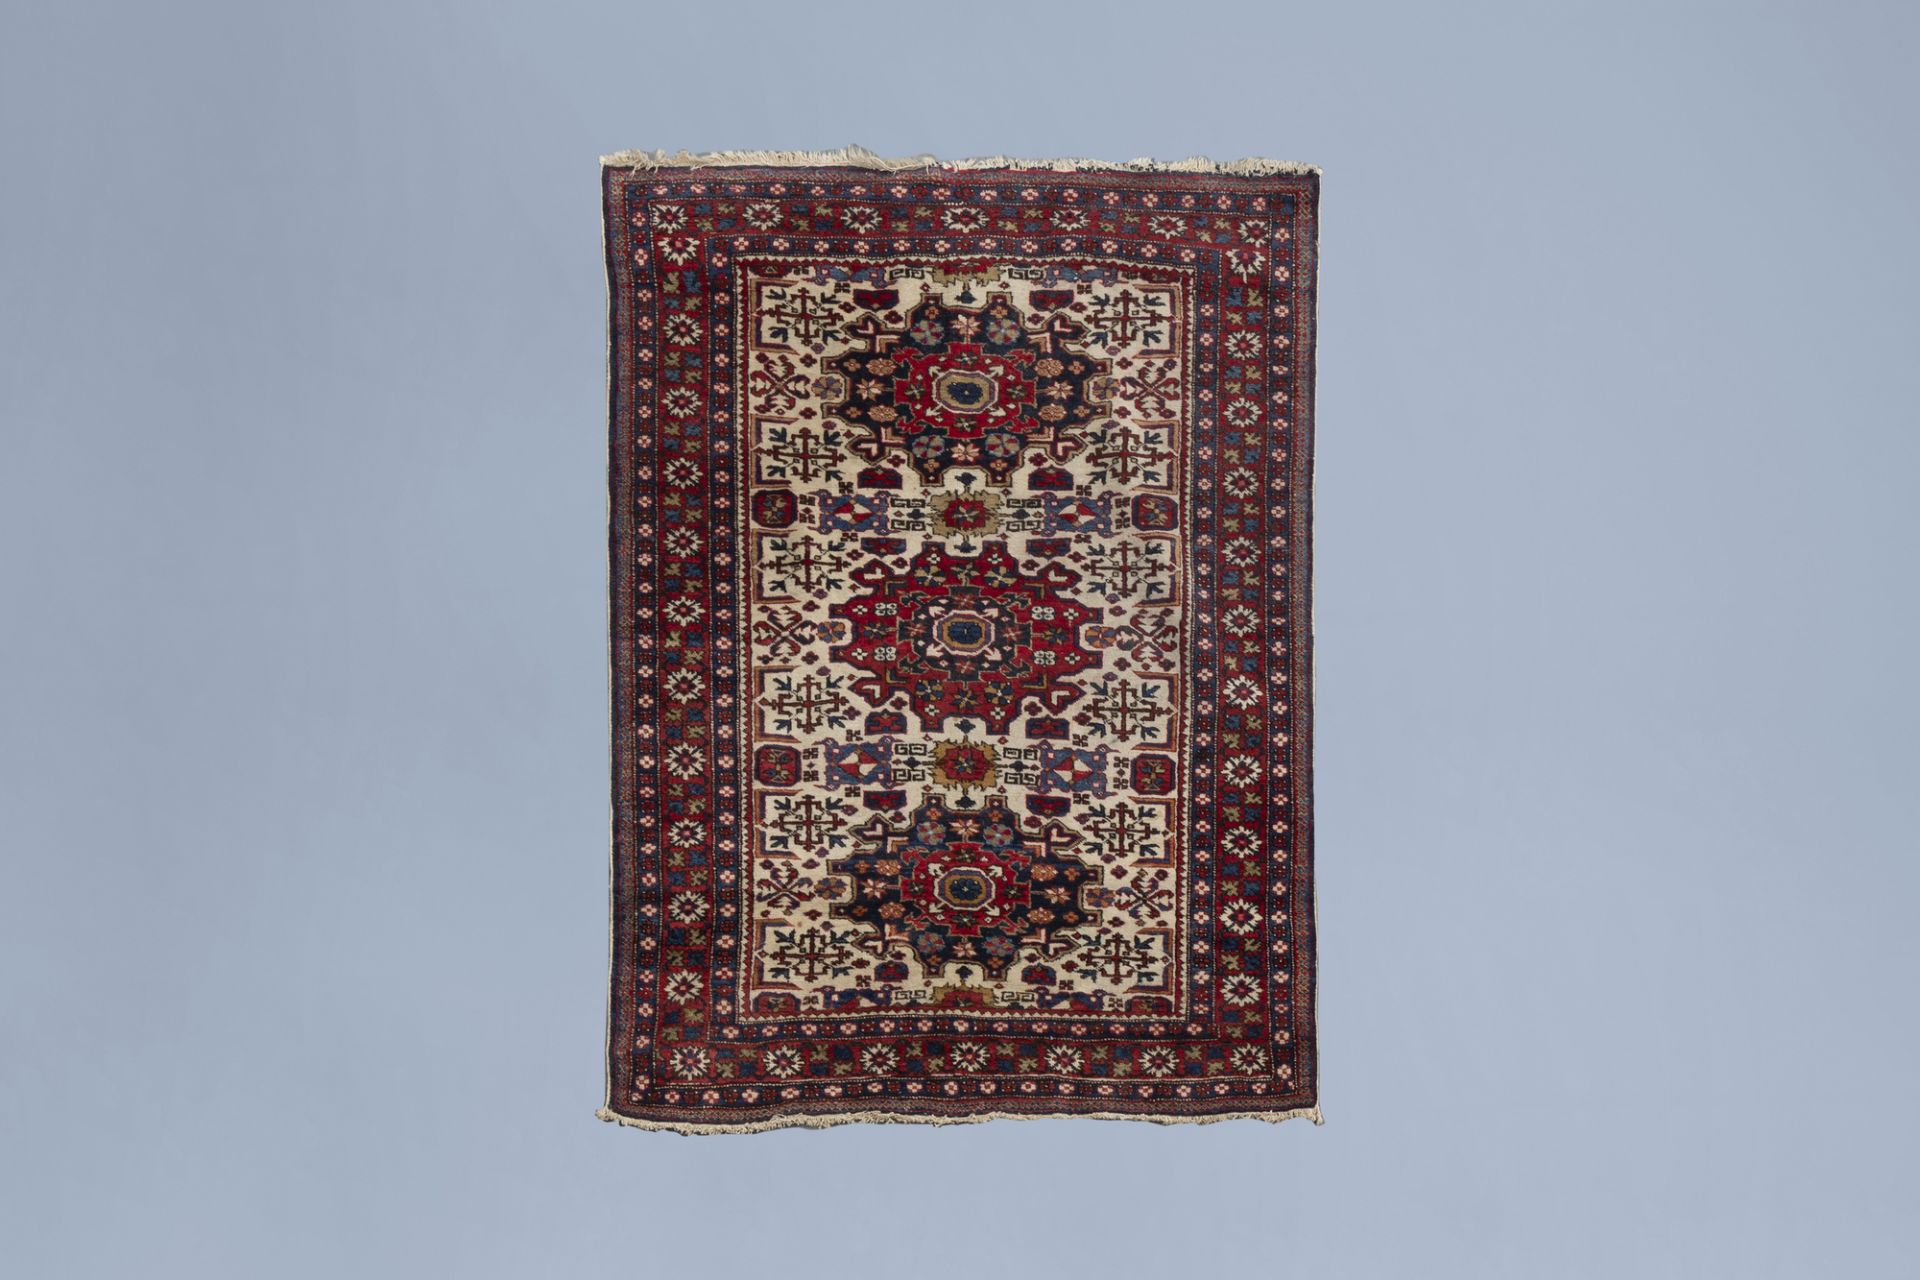 A Turkish rug with floral design, wool on cotton, mid 20th C.